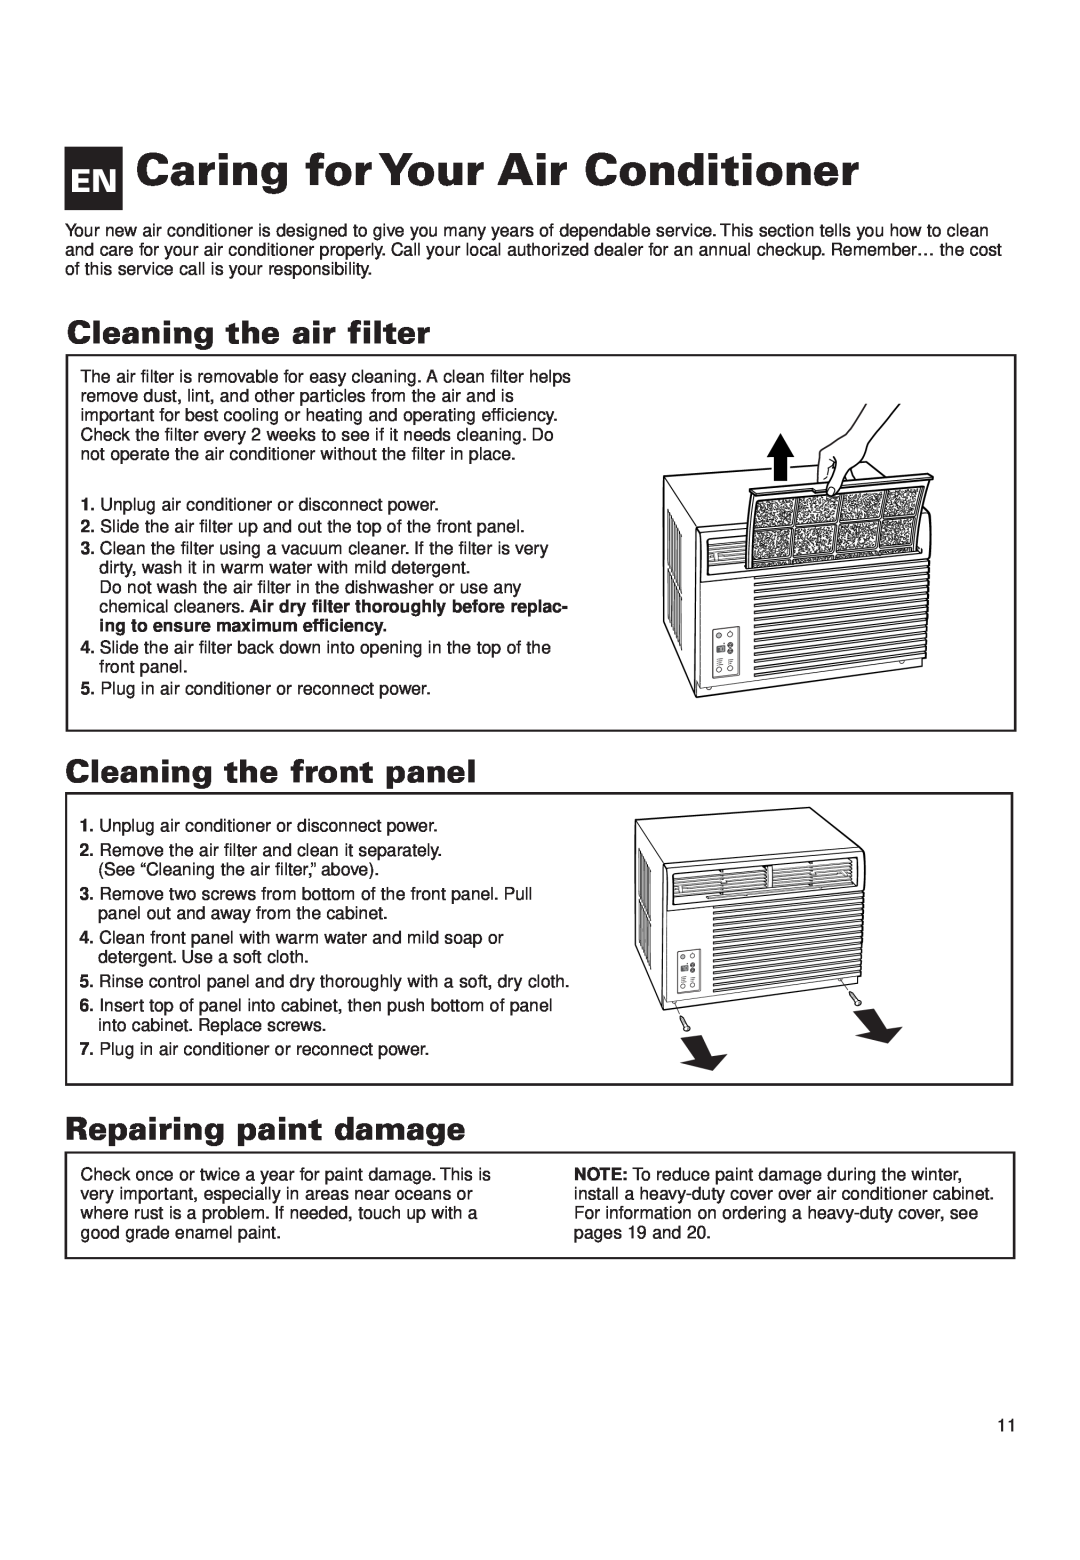 Whirlpool ACQ152XK0 manual EN Caring for Your Air Conditioner, Cleaning the air filter, Cleaning the front panel 